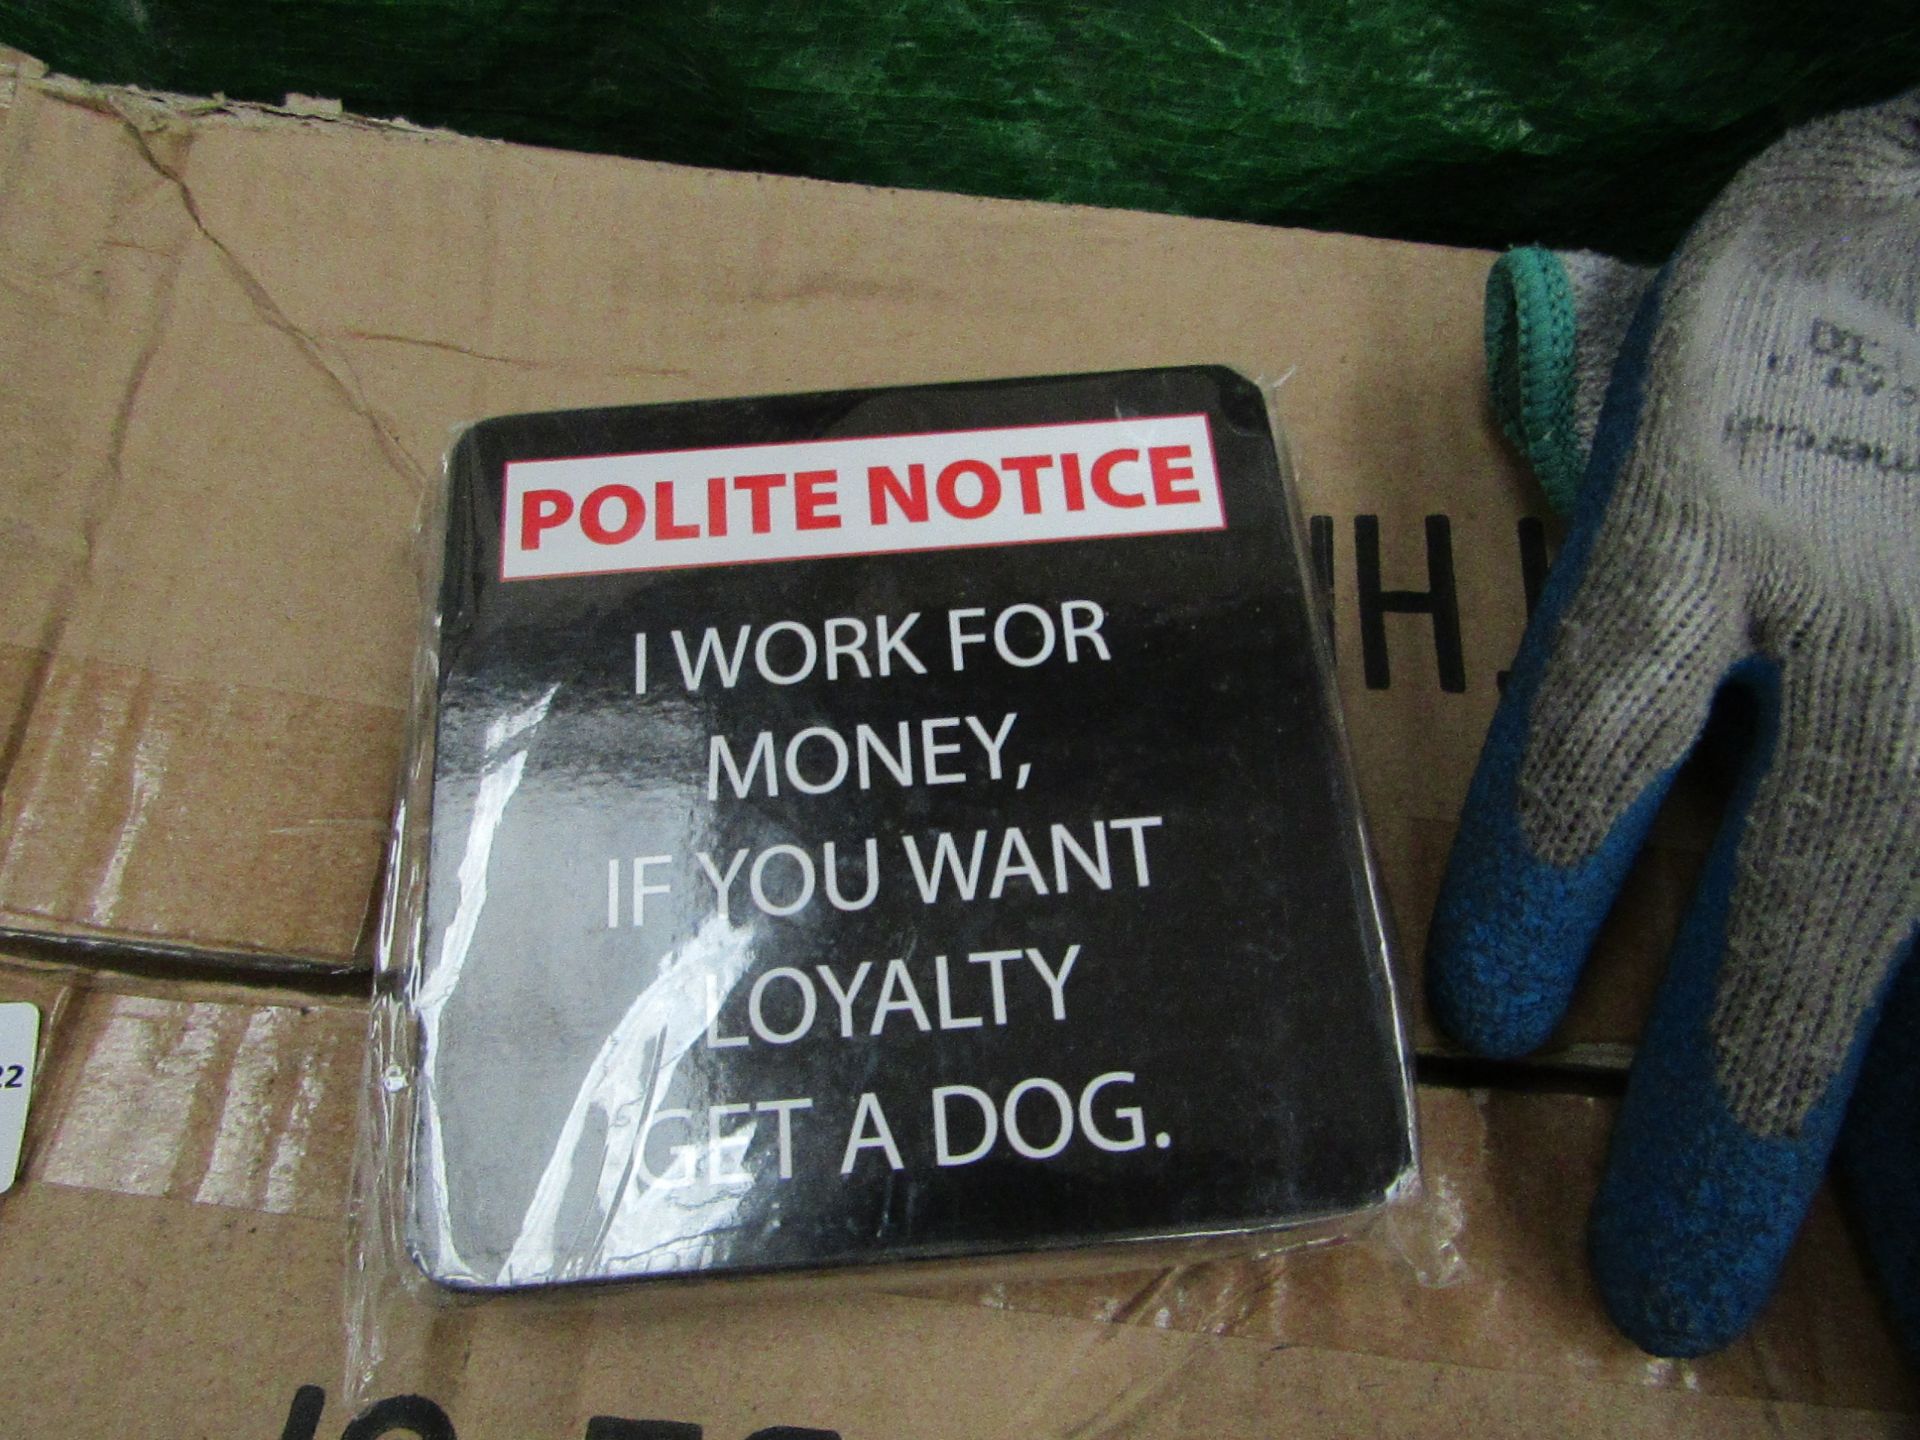 5x Spencer & Fleetwood - " POLITE NOTICE I WORK FOR MONEY, IF YOU WANT LOYALTY BUY A DOG. "